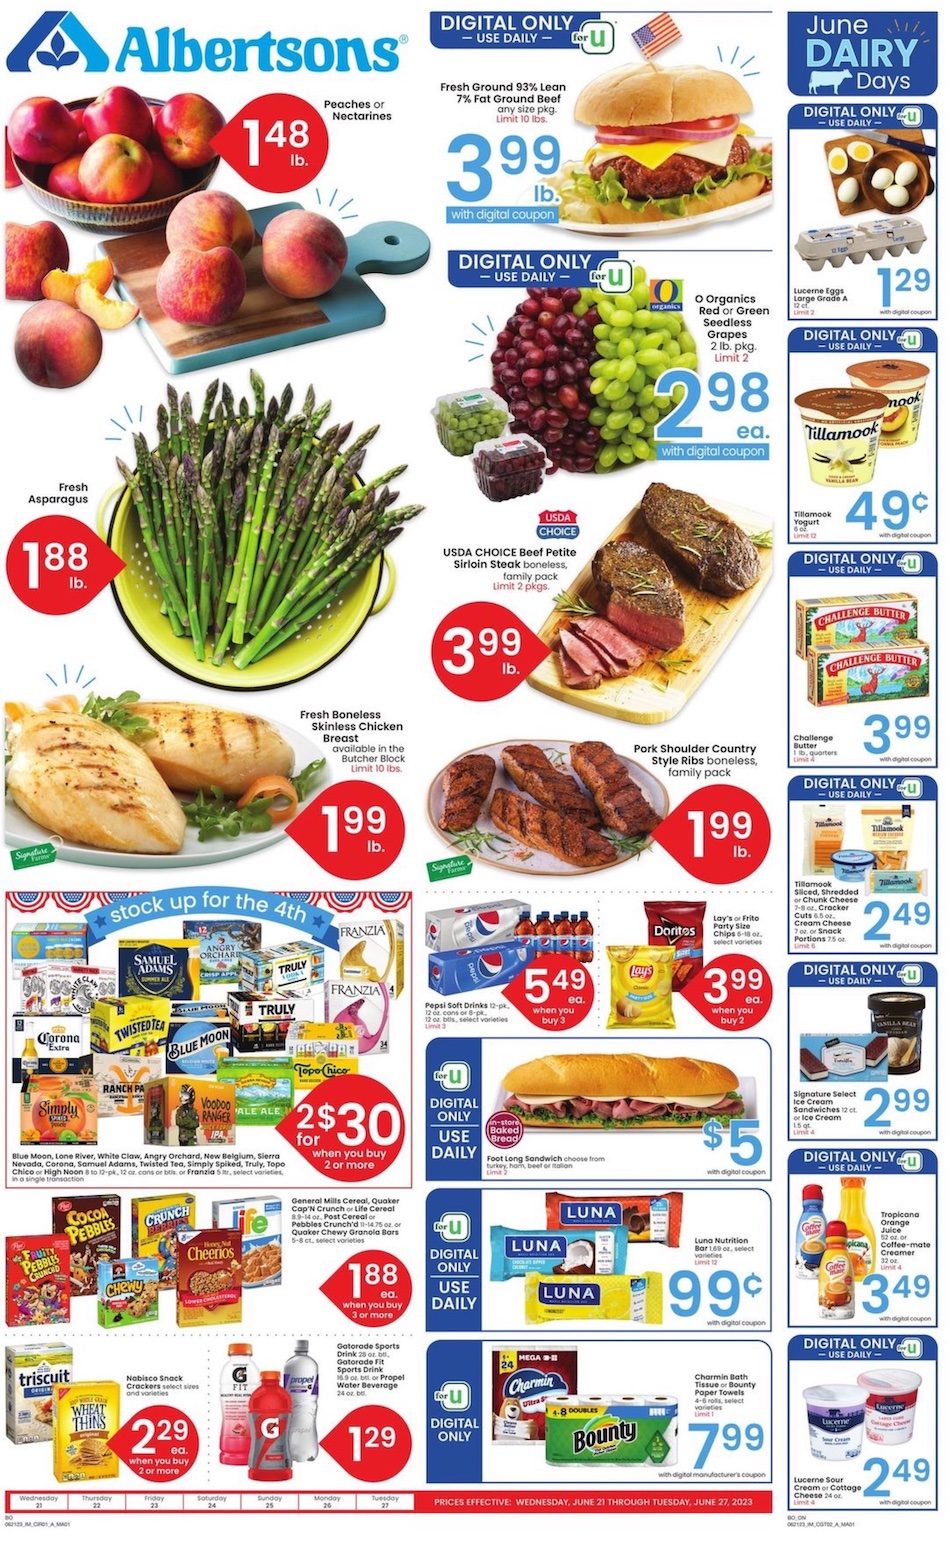 Albertsons Weekly Ad 21st – 27th June 2023 Page 1